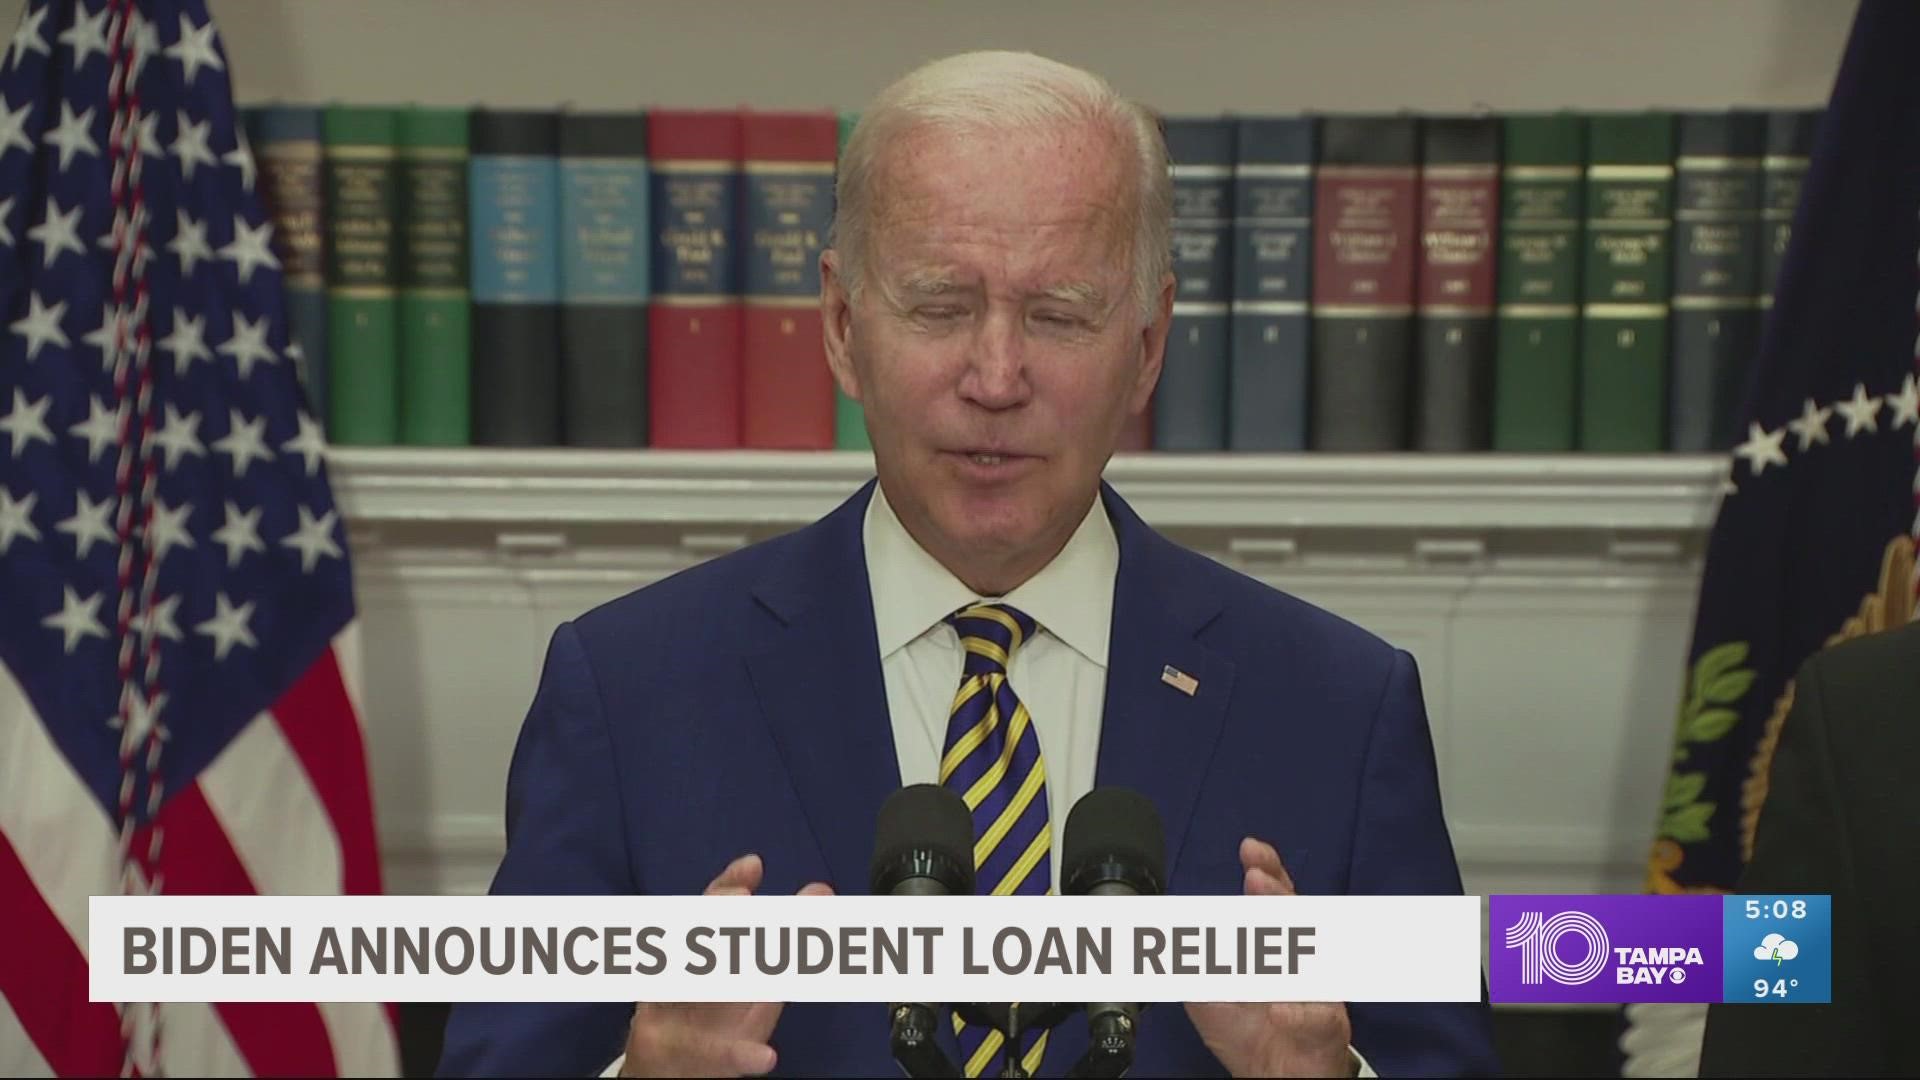 Biden has faced pressure from liberals to provide broader relief to hard-hit borrowers, but also from Republicans questioning the fairness of any broad forgiveness.